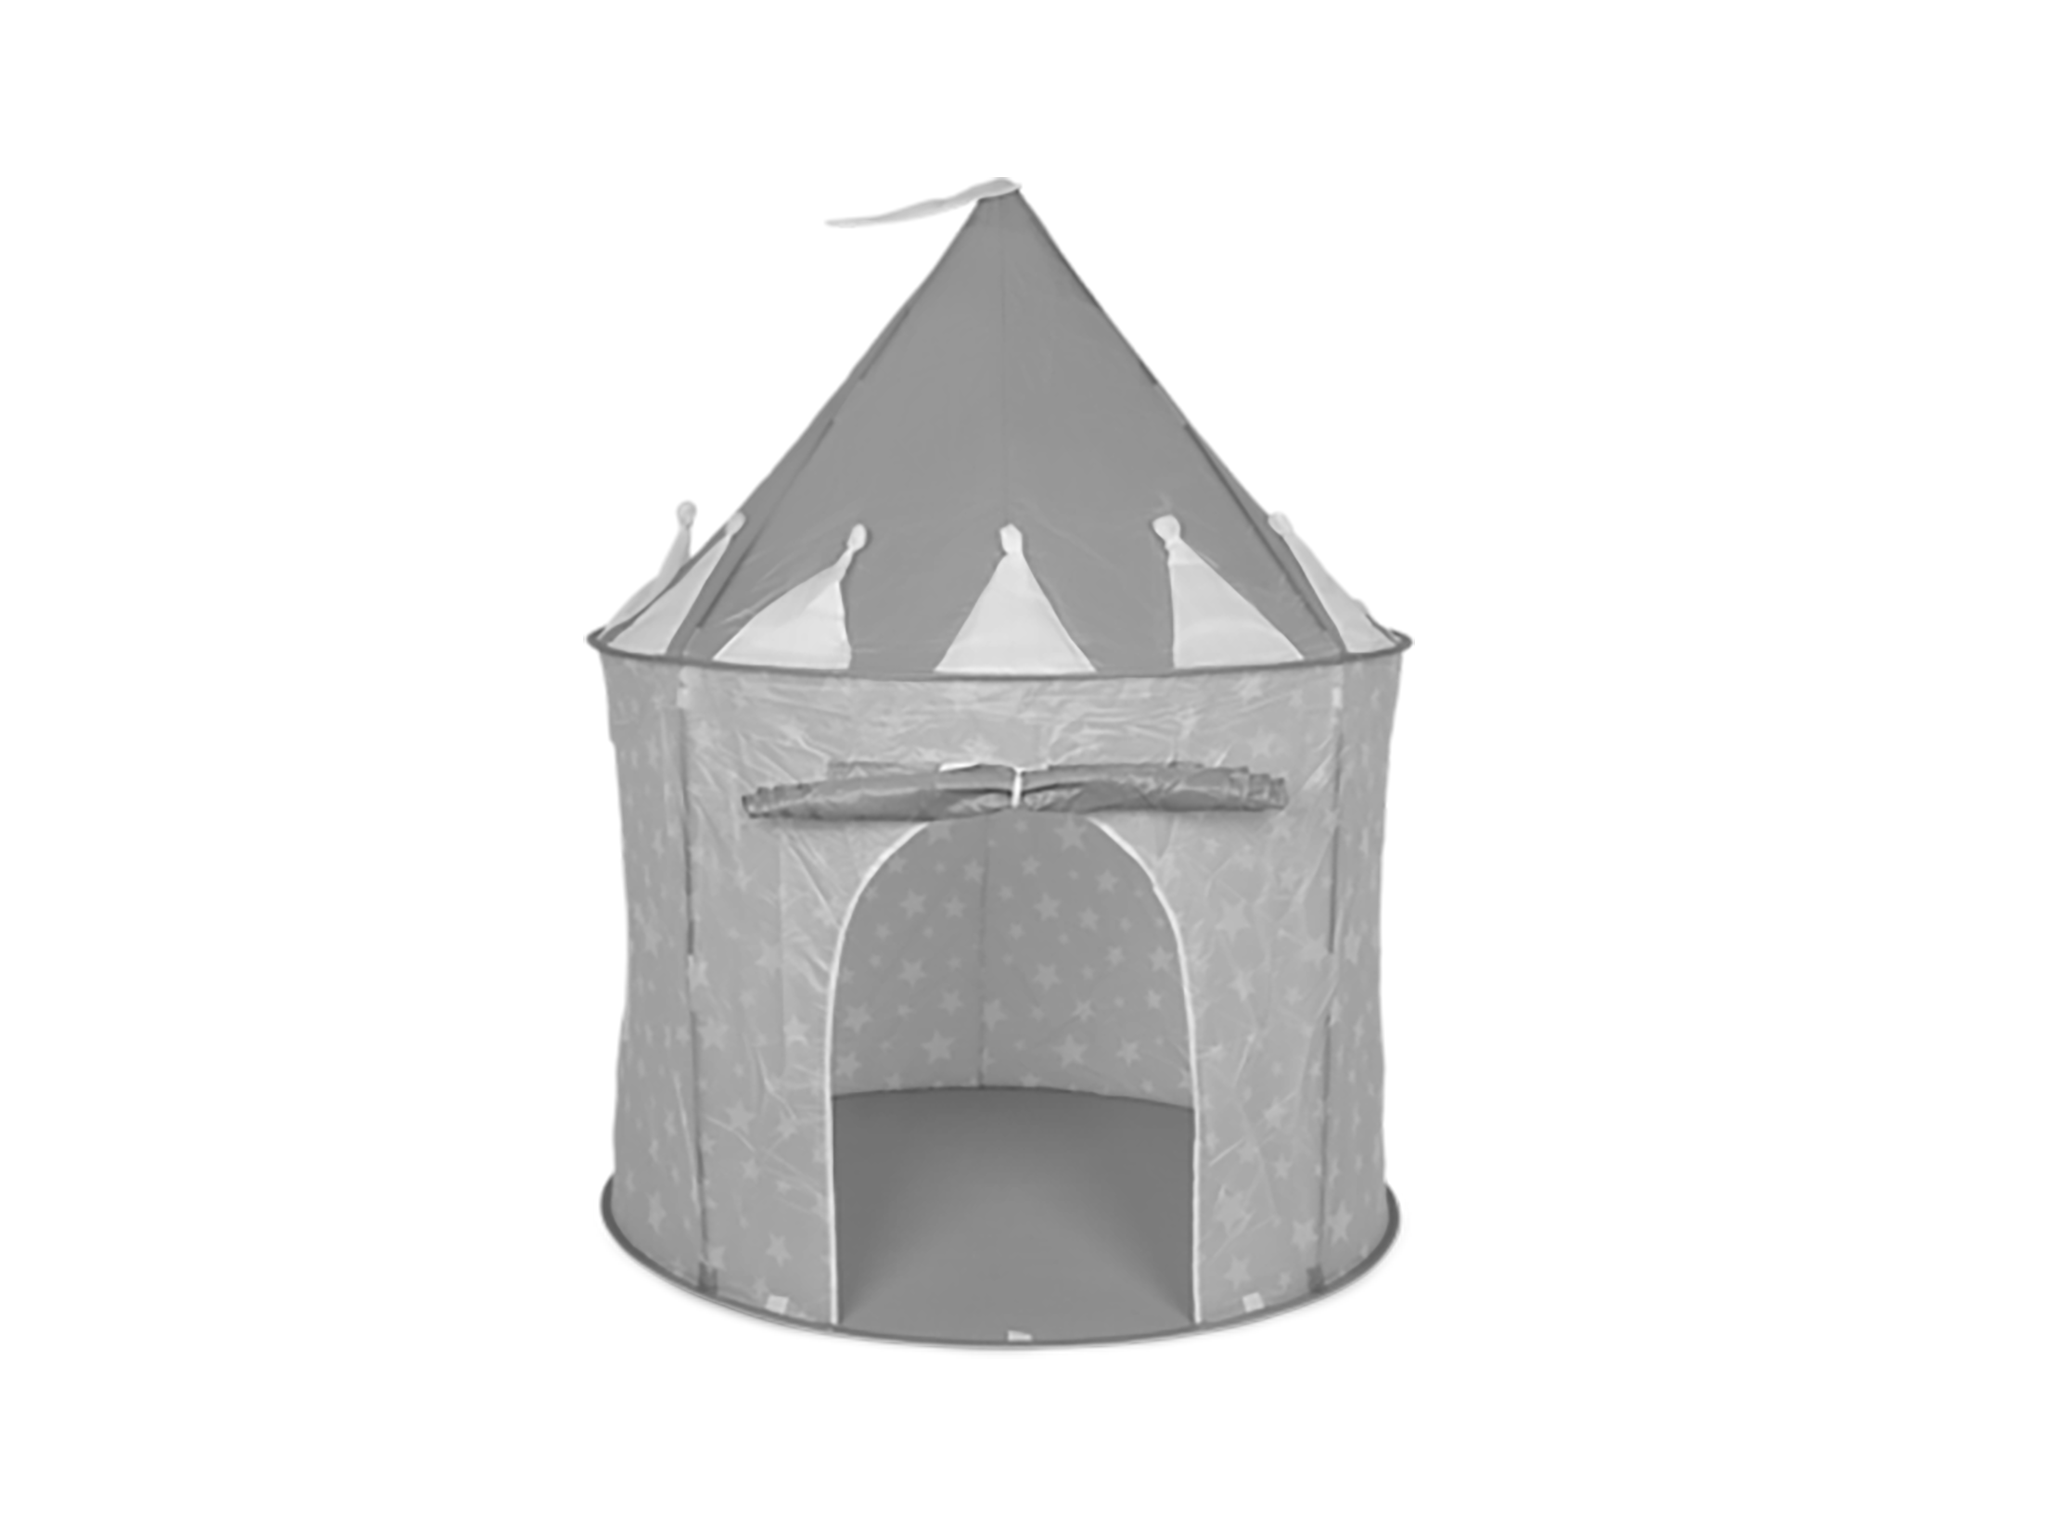 RONGFA Beige Tent for Kids Beige Small Size Children Play Tents in Natural Canvas Portable Children Indoor and Outdoor Play House 